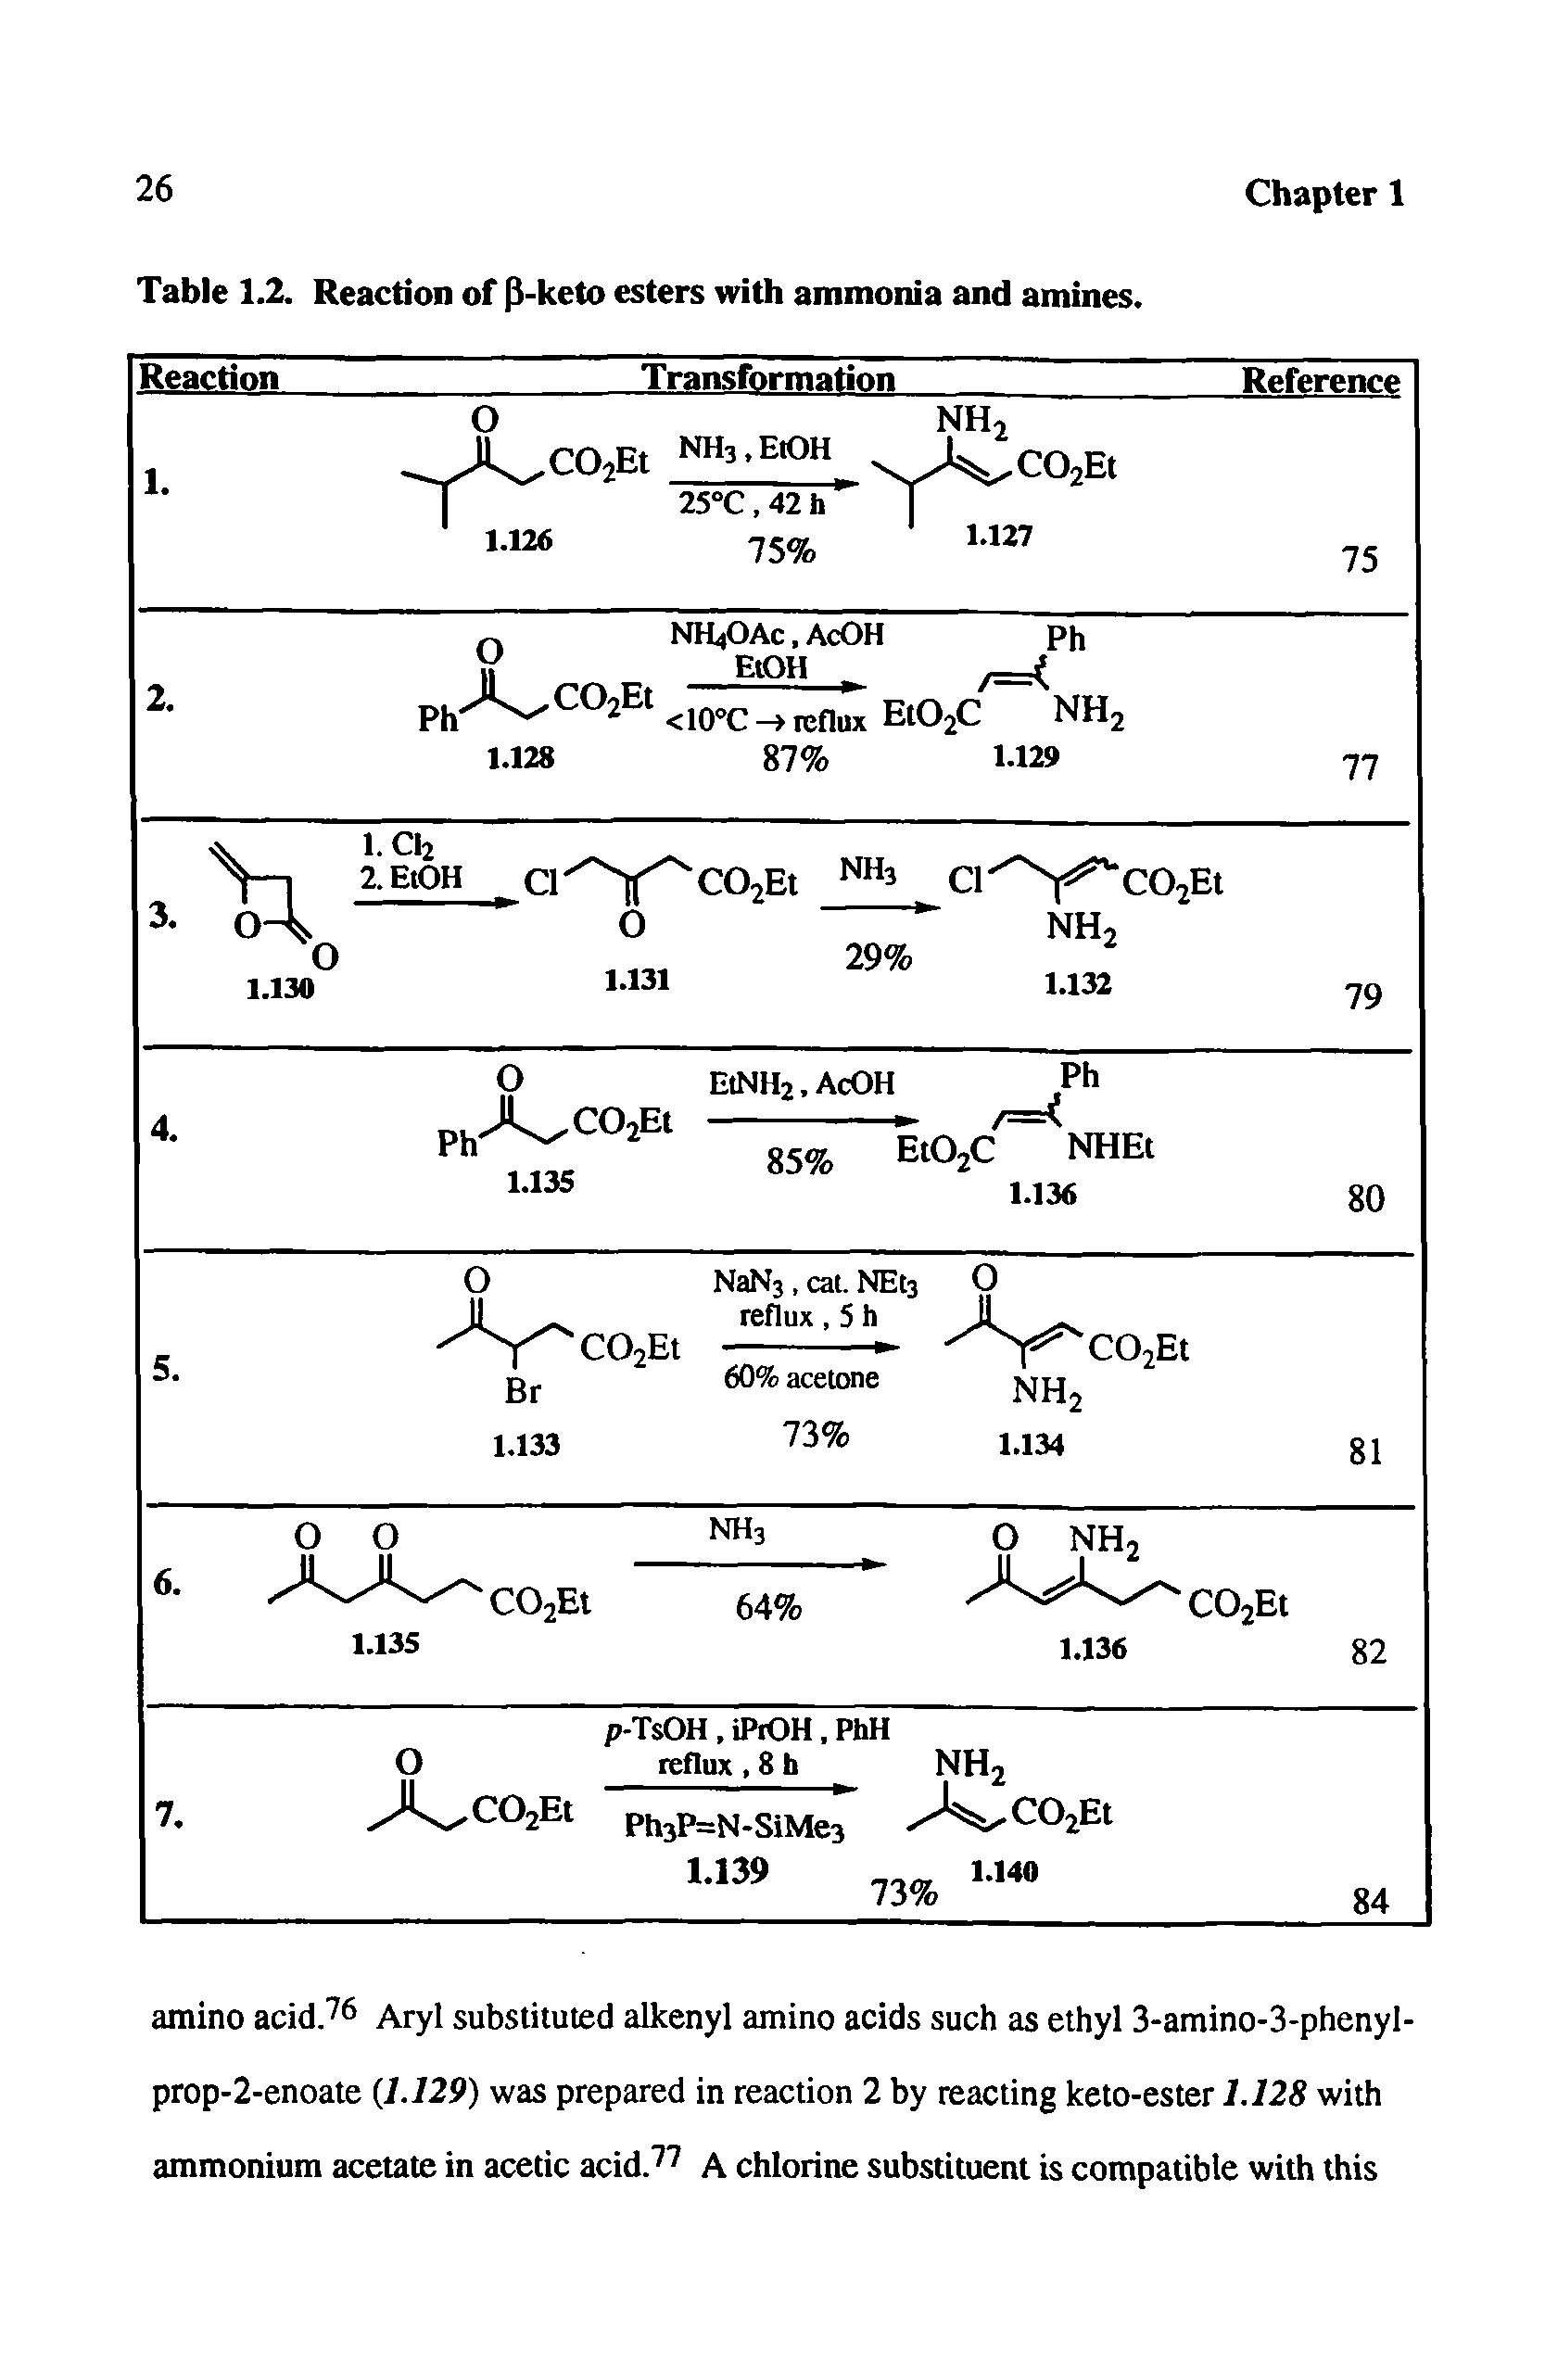 Table 1.2. Reaction of P-keto esters with ammonia and amines.